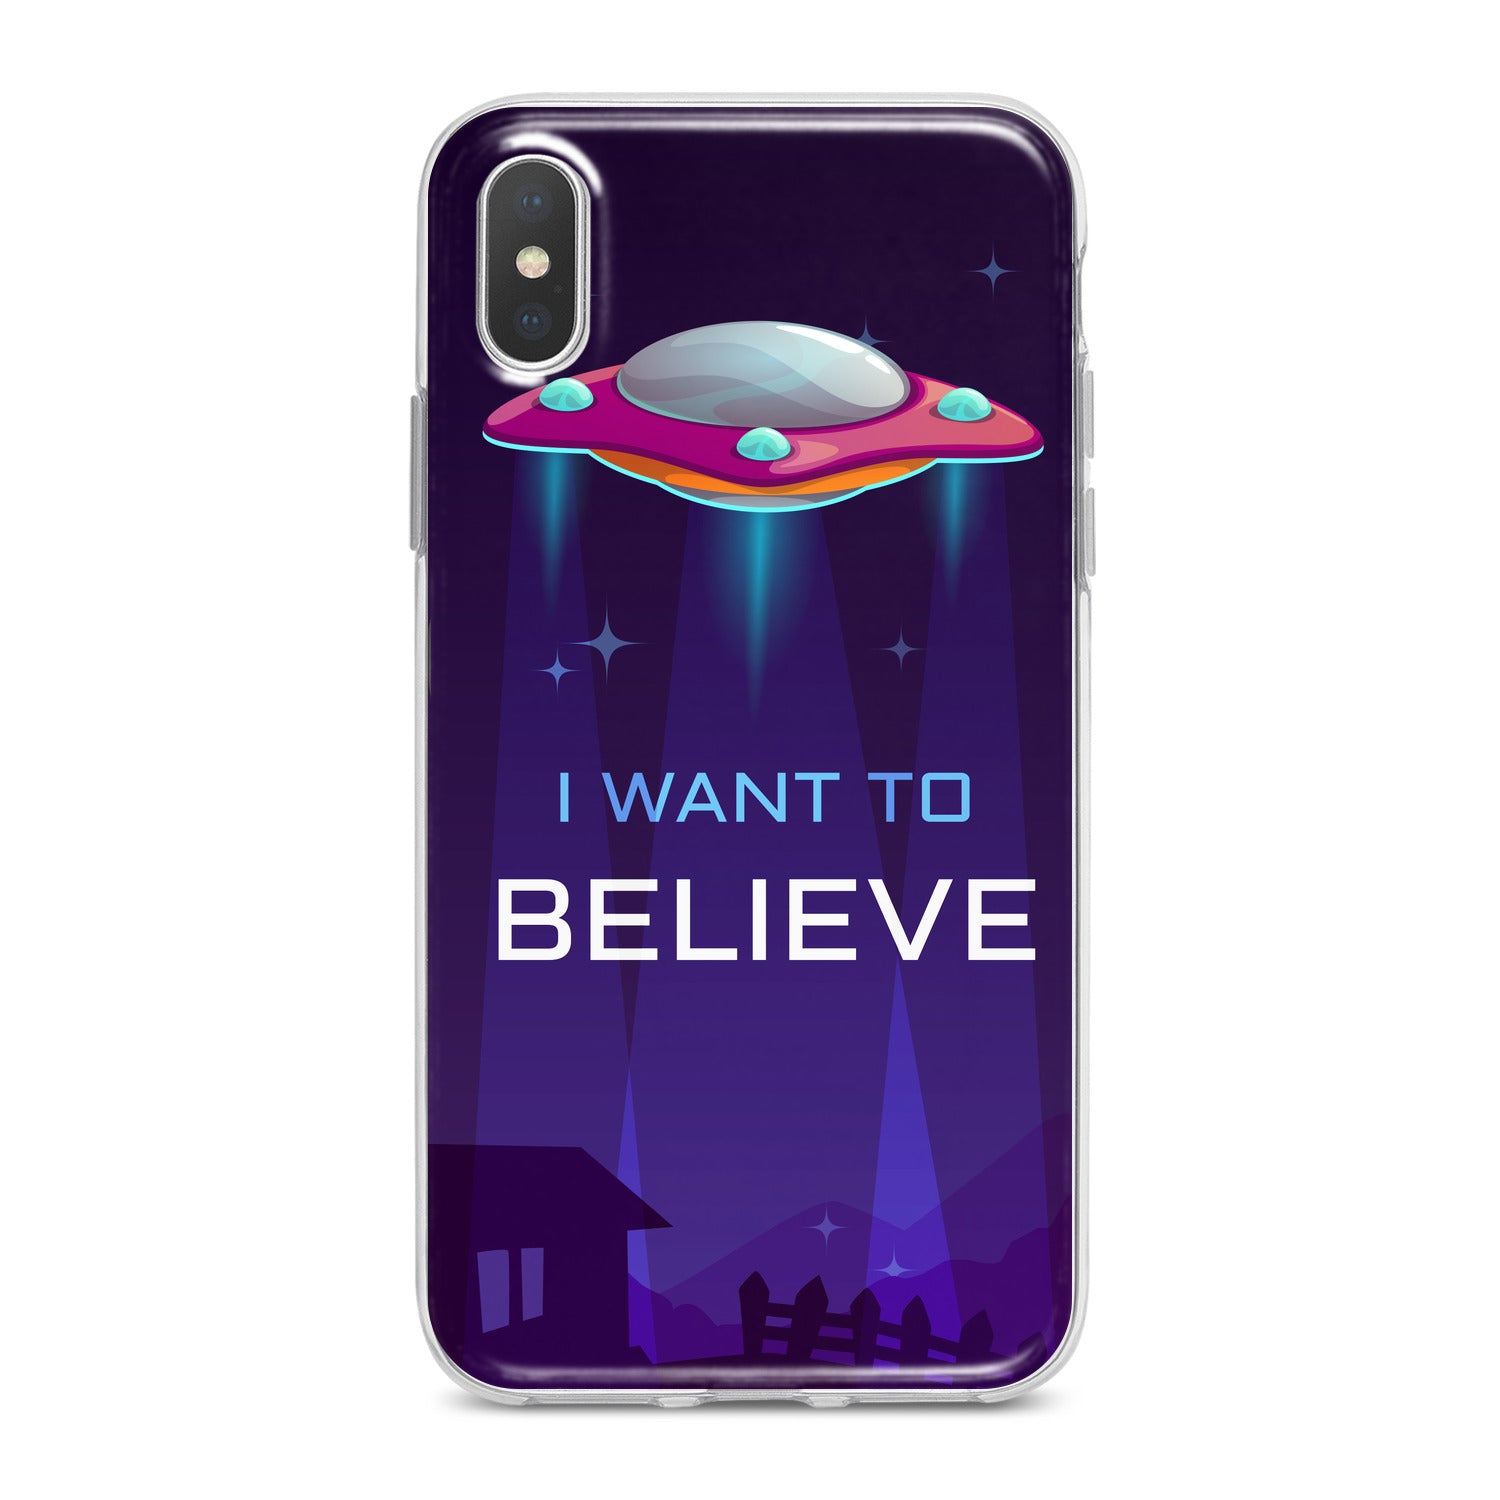 Lex Altern Blue Ufo Phone Case for your iPhone & Android phone.